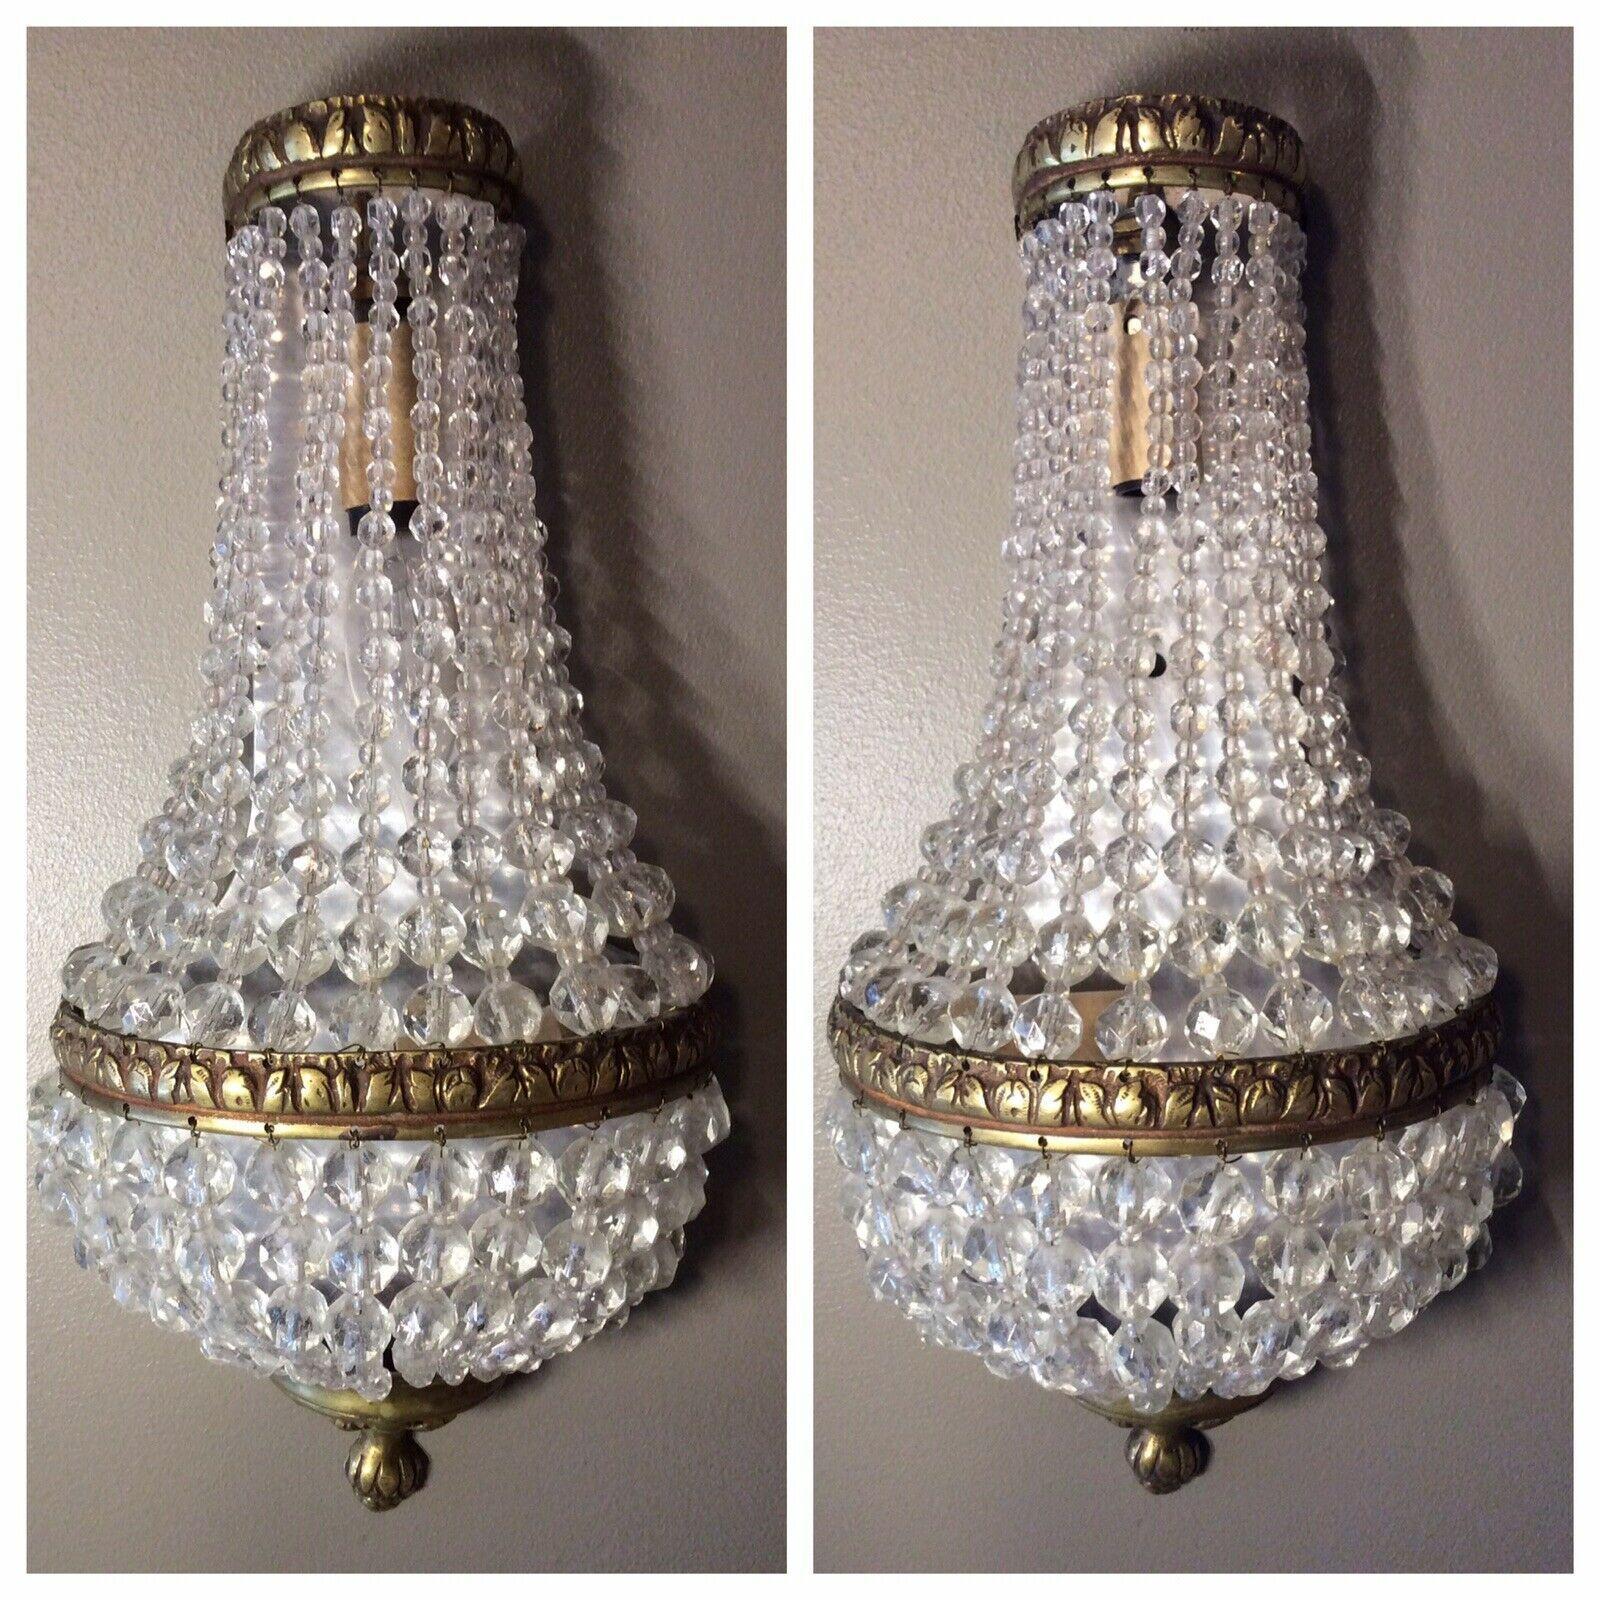 What makes this pair of cascading crystal different? These are authentic 1920's. Pair of 1920's Cut Crystal Bag and Tent / Empire style Wall Sconces. Bronze framed. All intact and original.